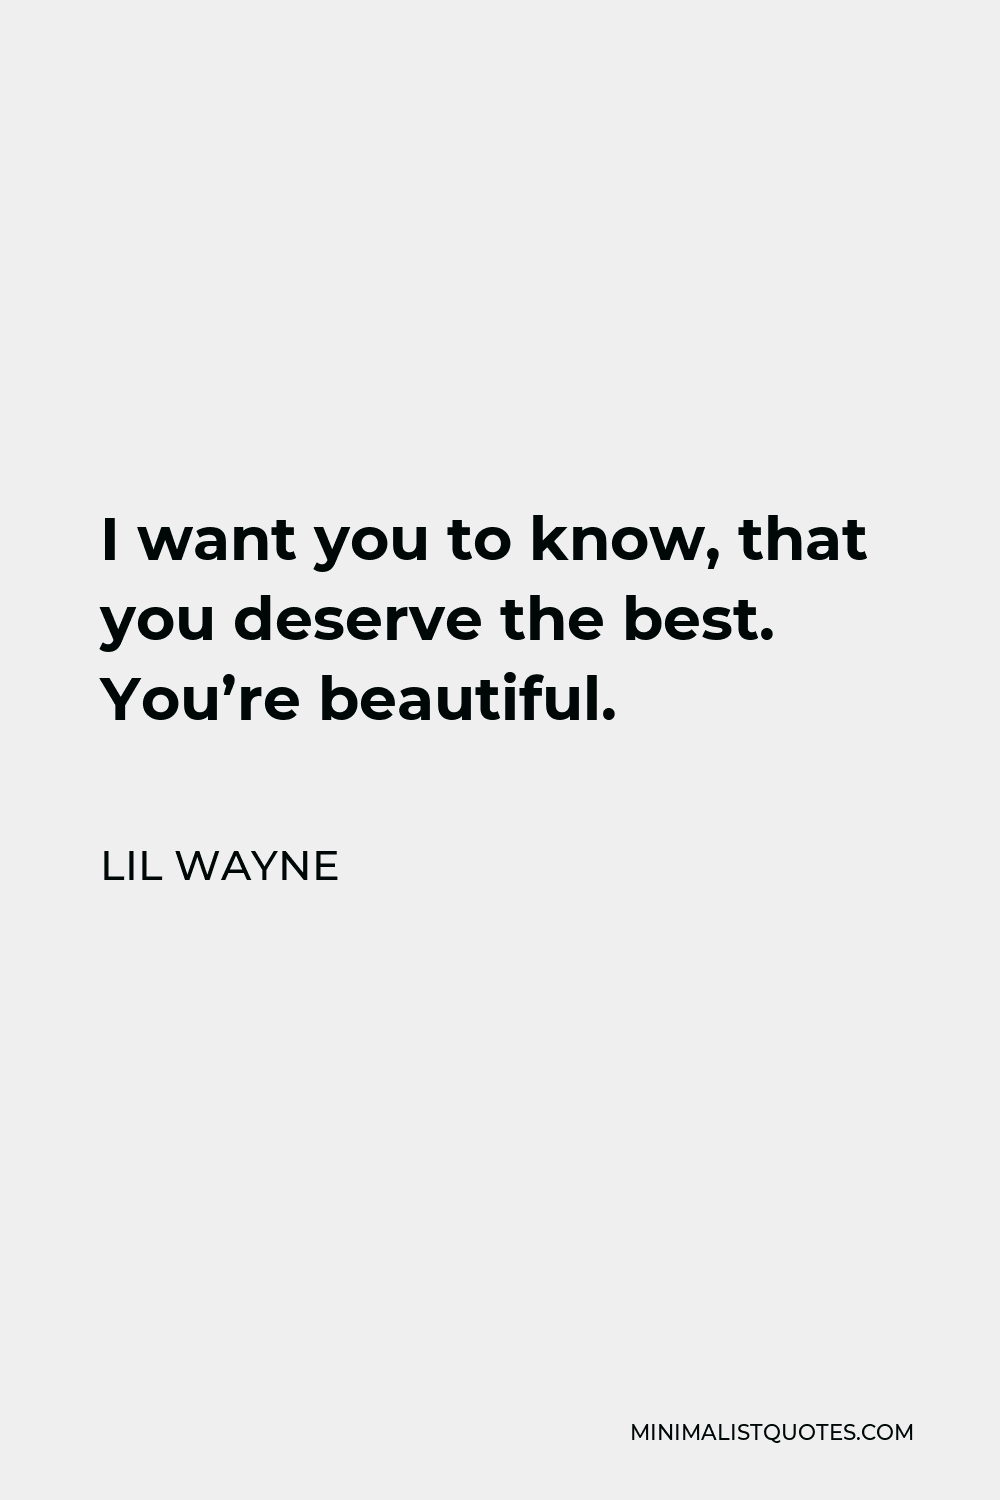 Lil Wayne Quote - I want you to know, that you deserve the best. You’re beautiful.